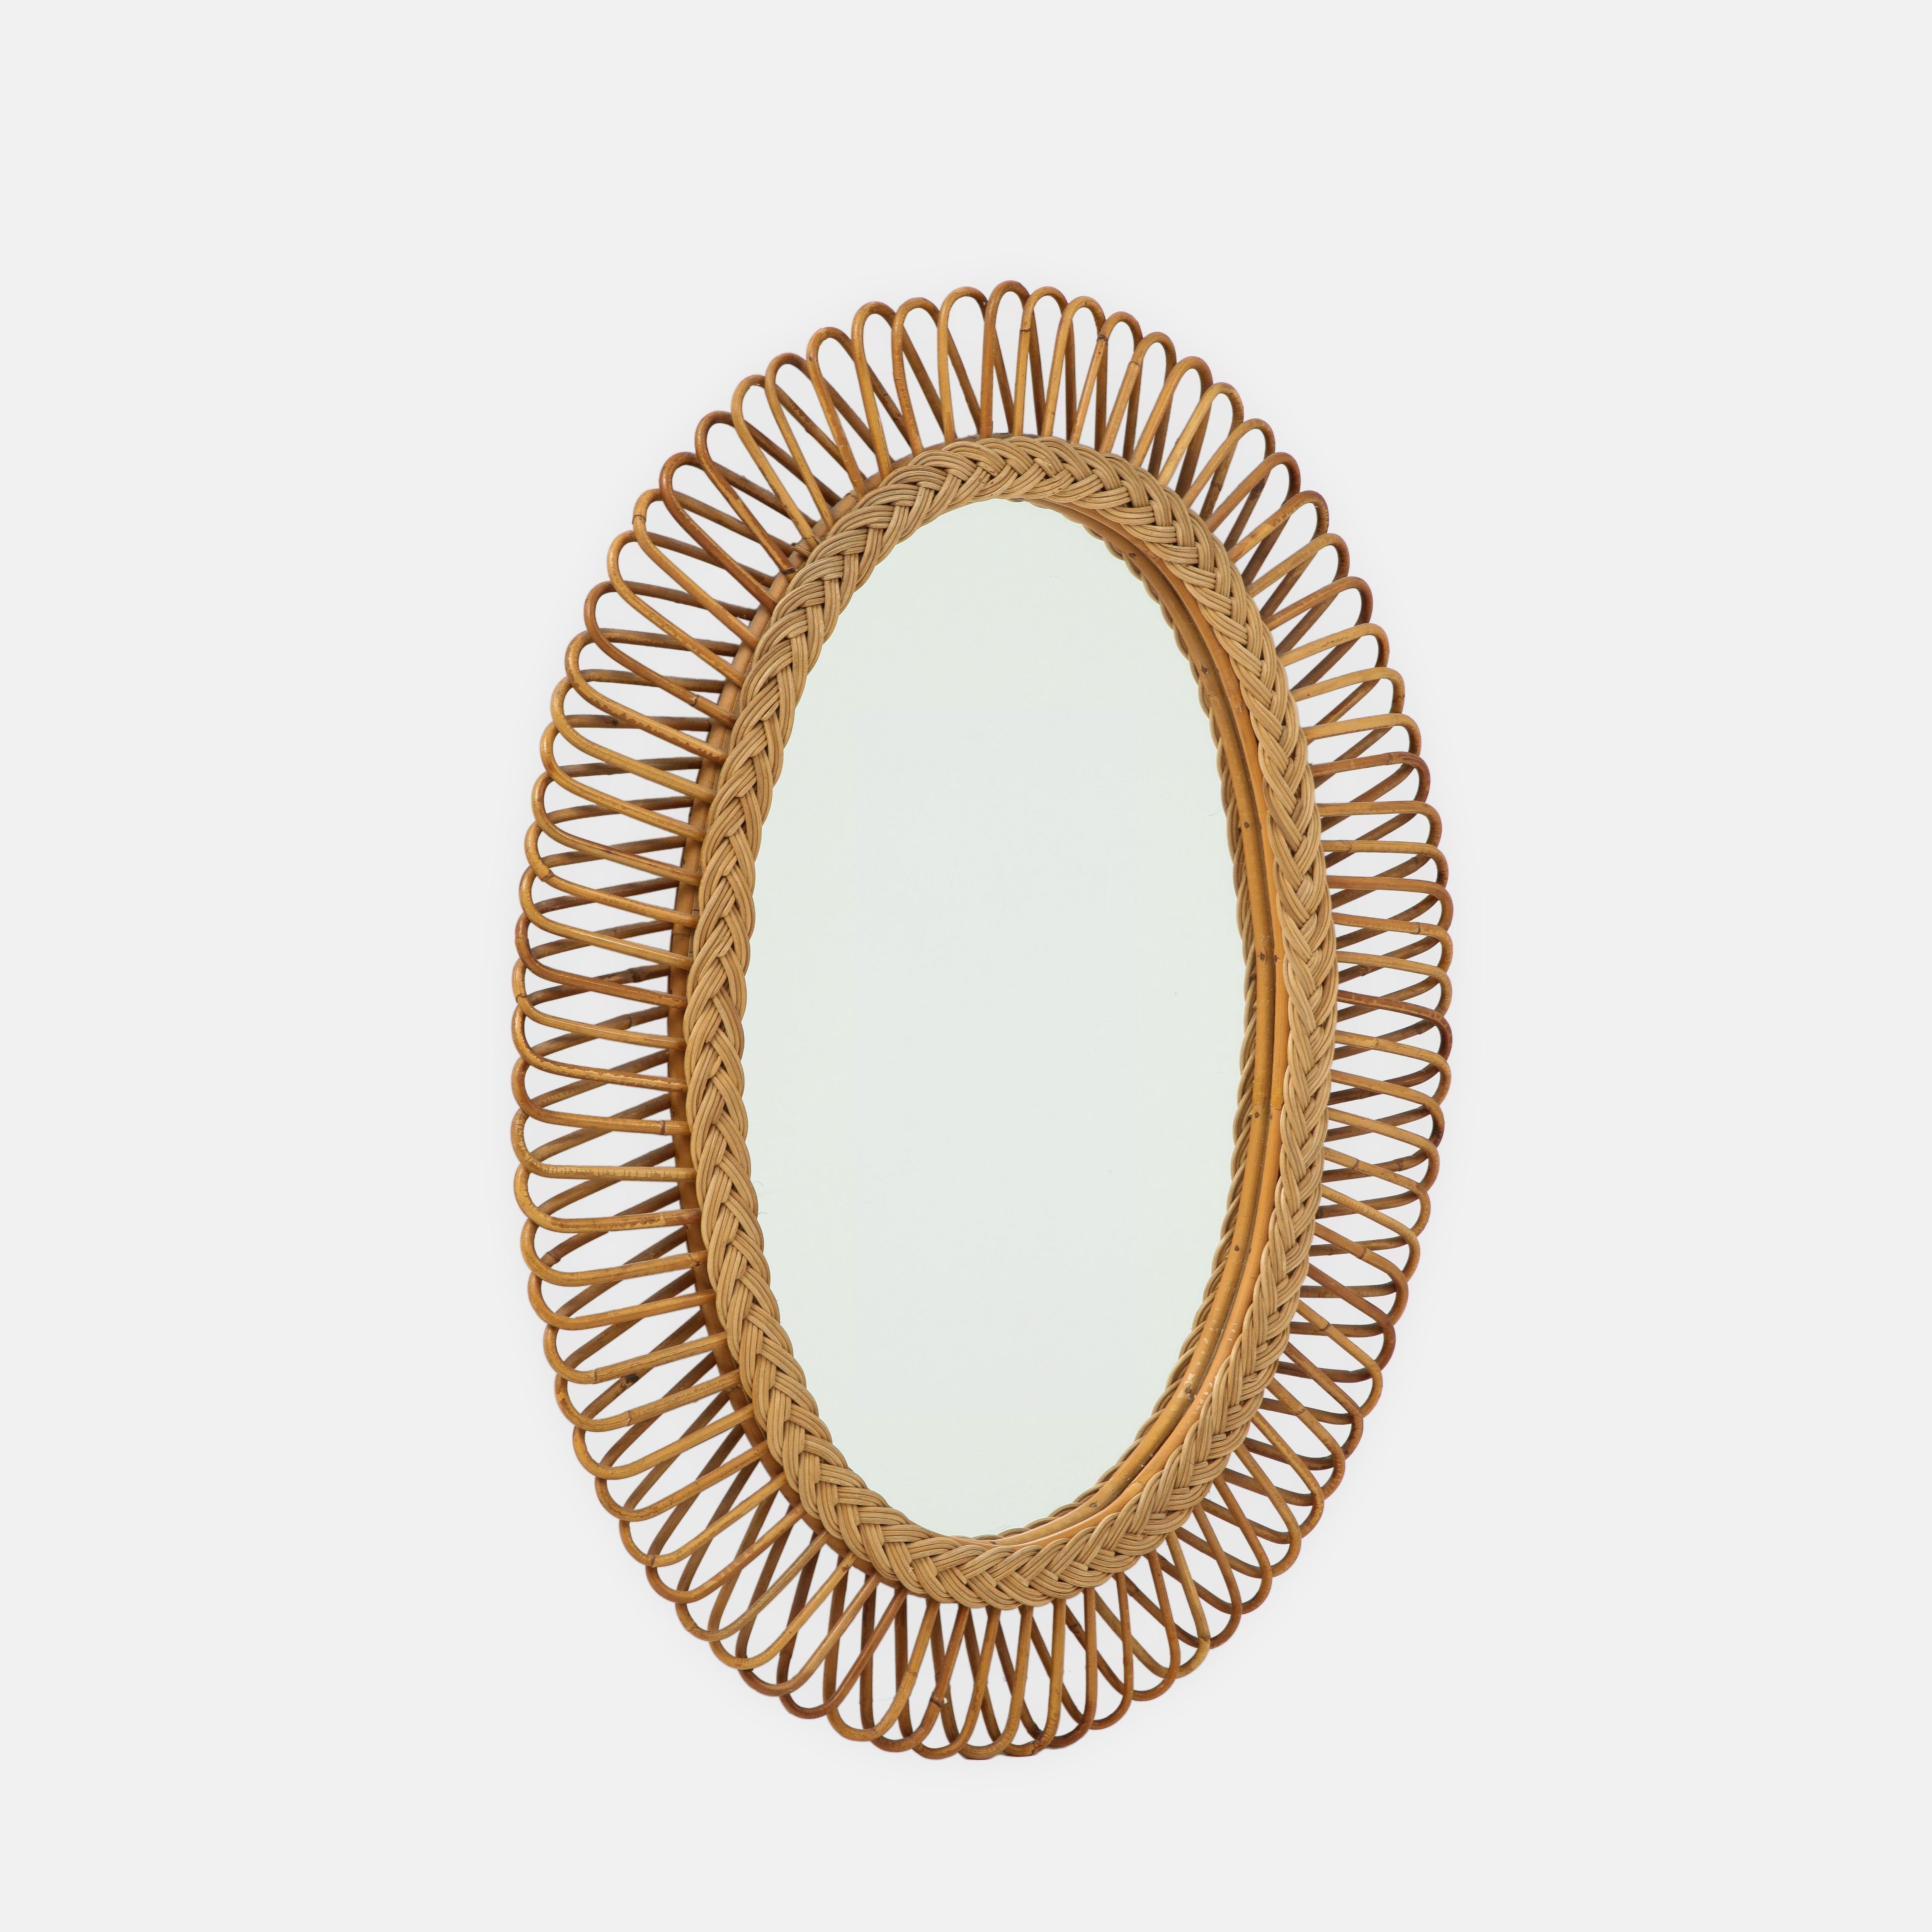 Bonacina oval bamboo and rattan wall mirror, Italy, 1950s. This chic and iconic mid-century Italian mirror is intricately hand-woven with bamboo and rattan including a lovely braid around the mirror edge.